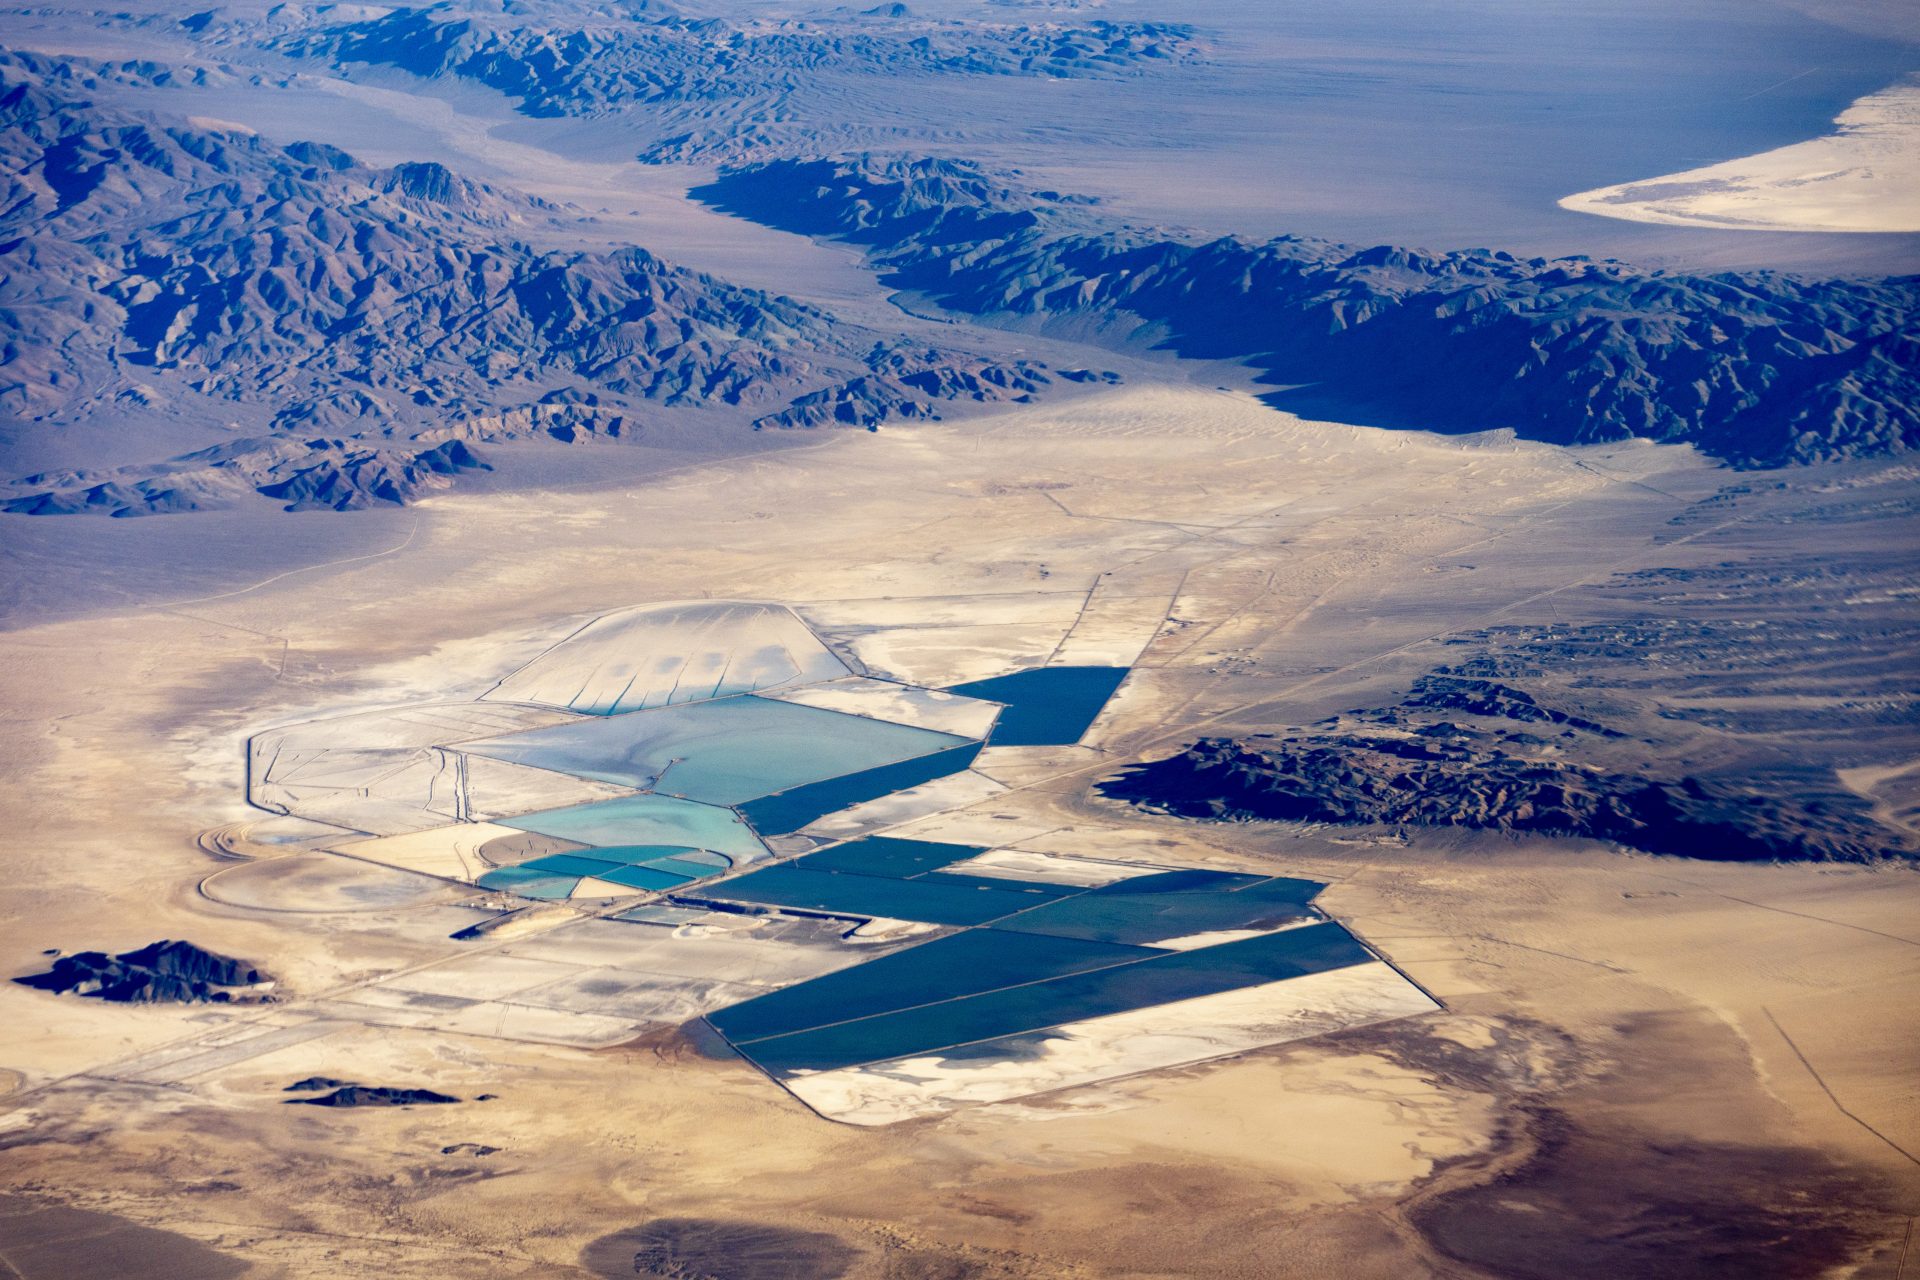 The lithium is on unceded tribal lands 